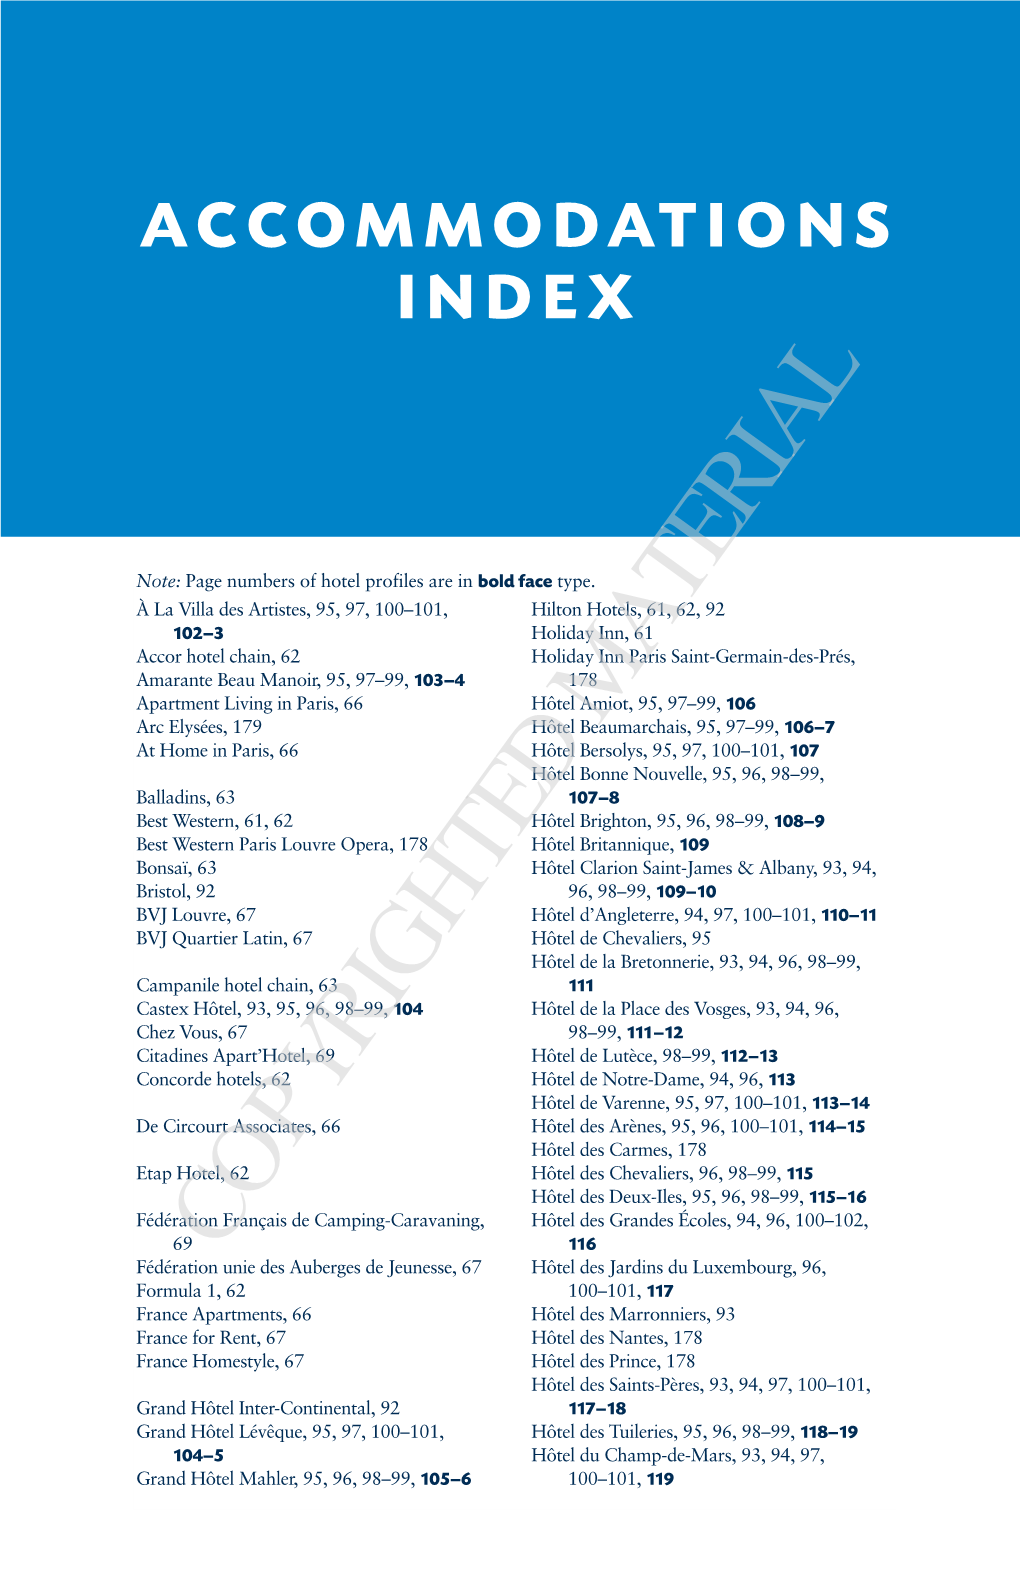 Accommodations Index